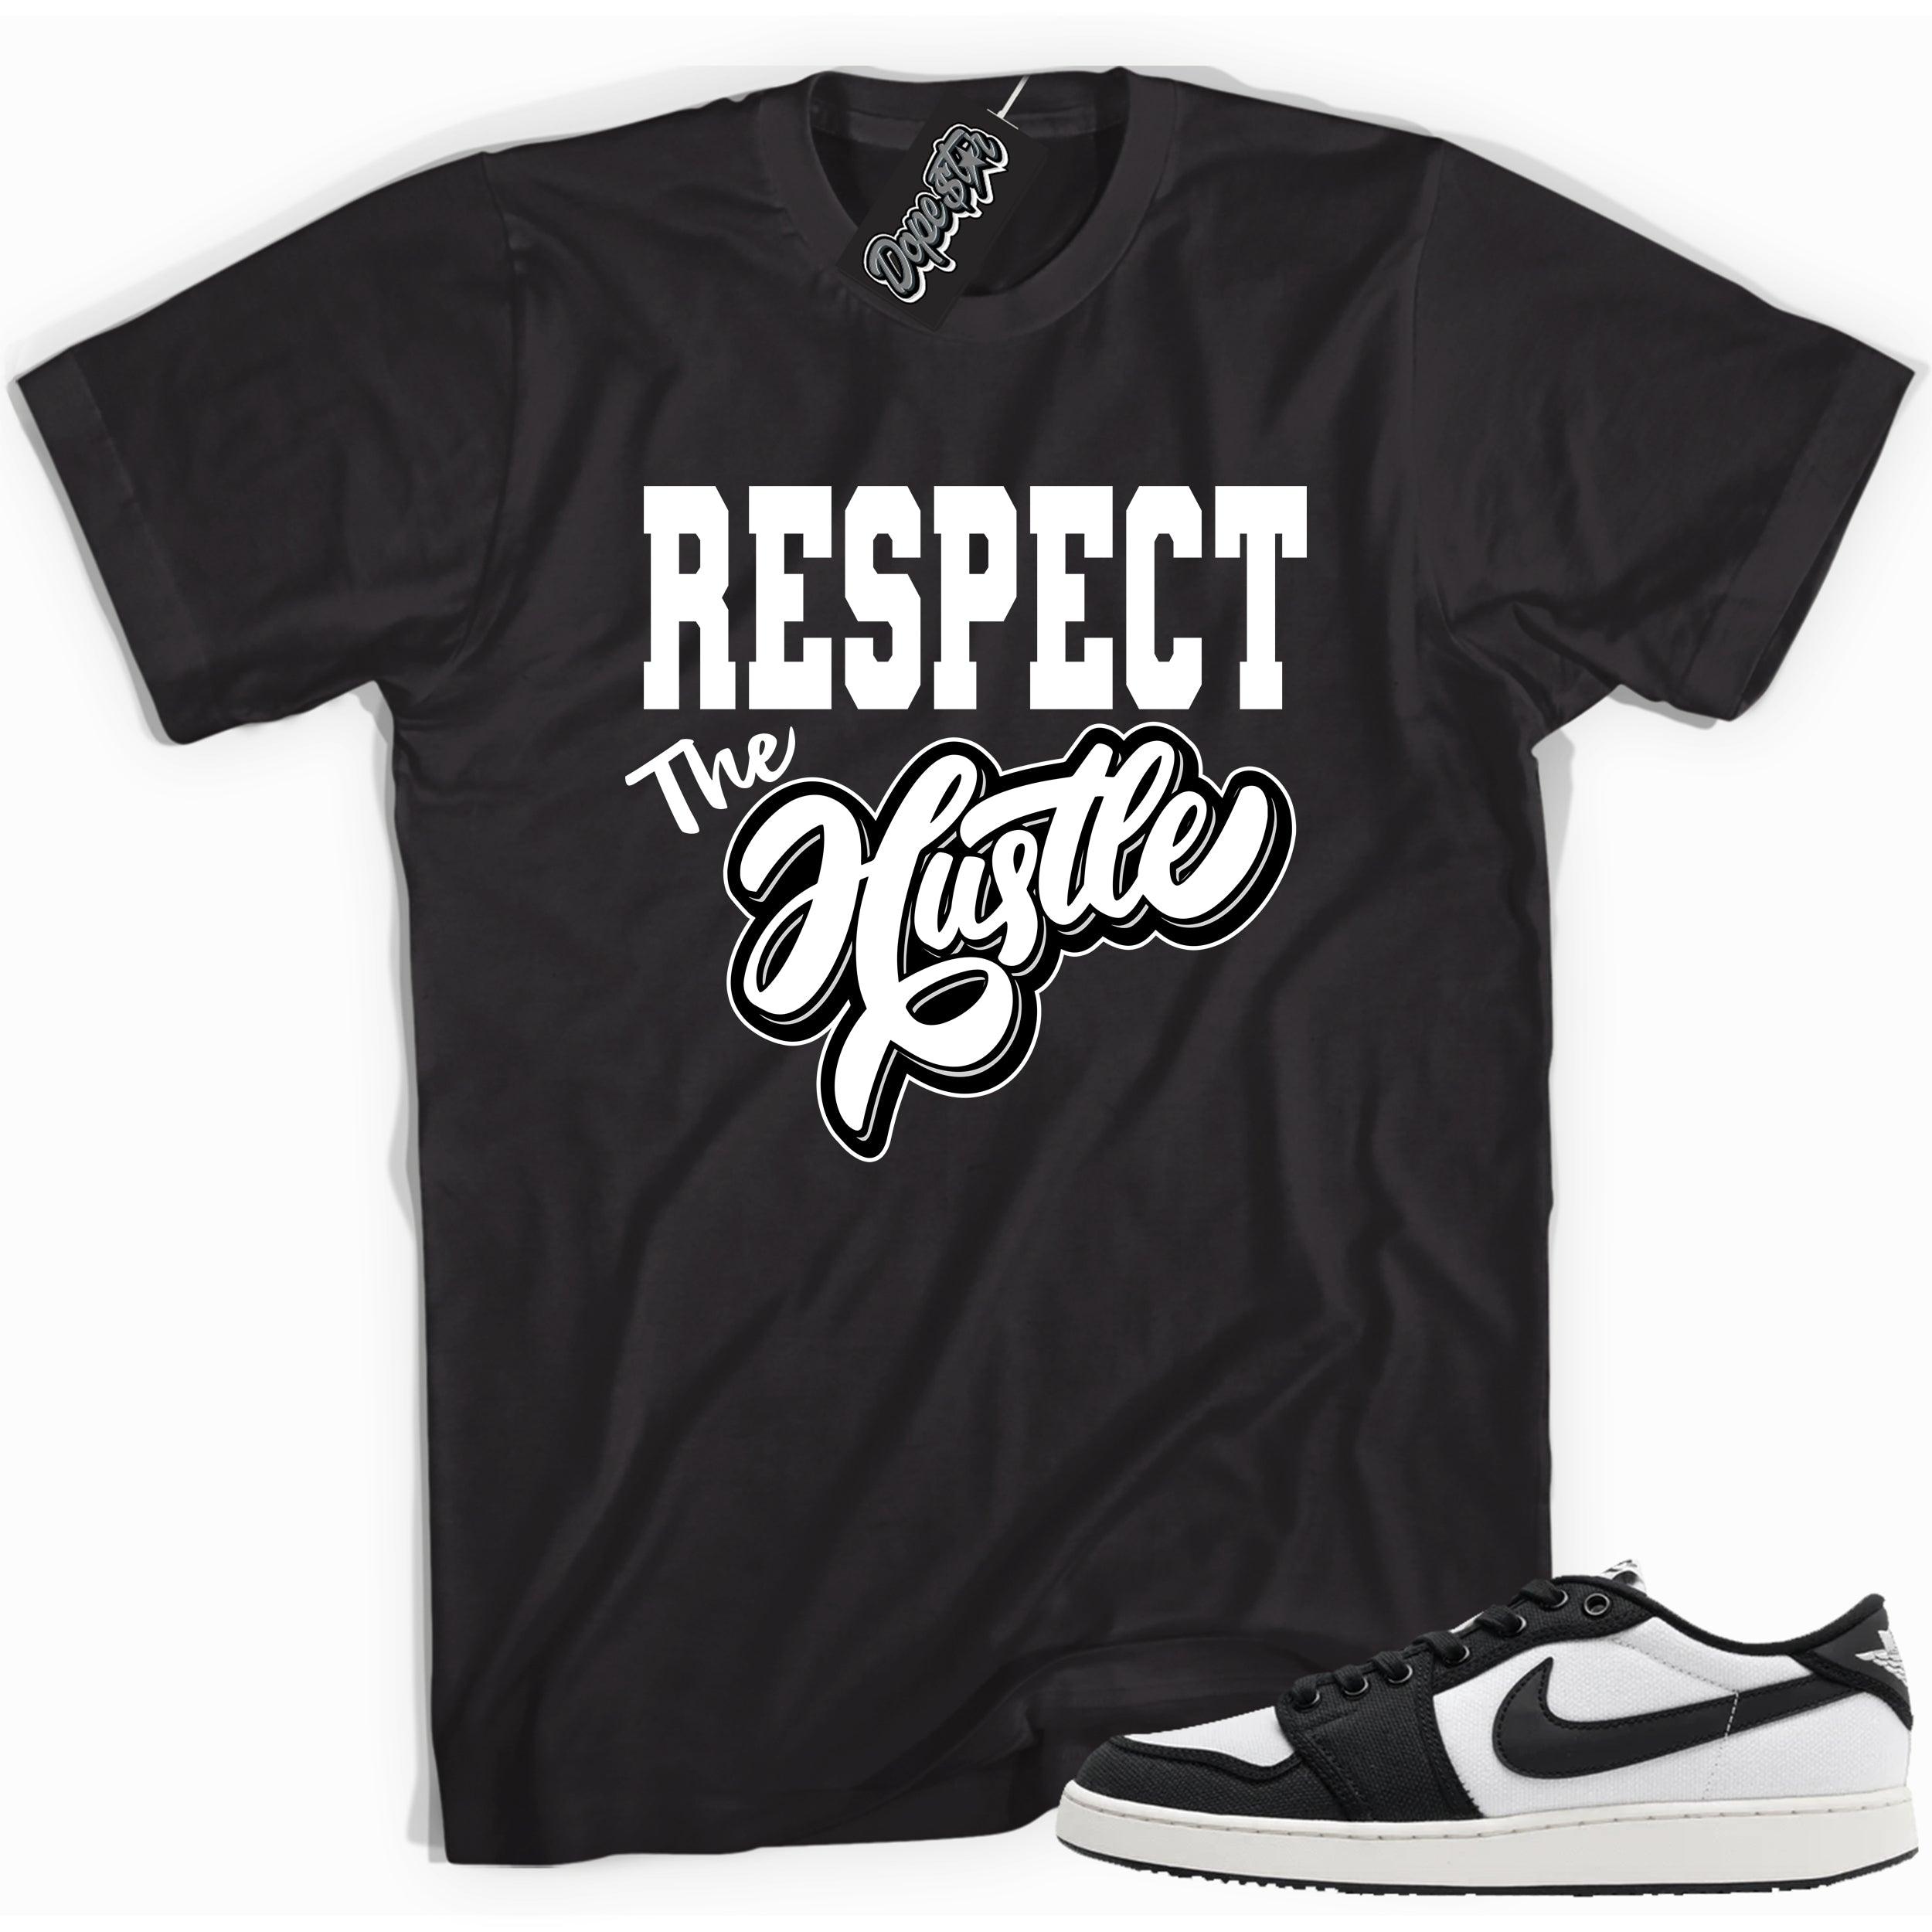 Cool black graphic tee with 'respect the hustle' print, that perfectly matches Air Jordan 1 Retro Ajko Low Black & White sneakers.